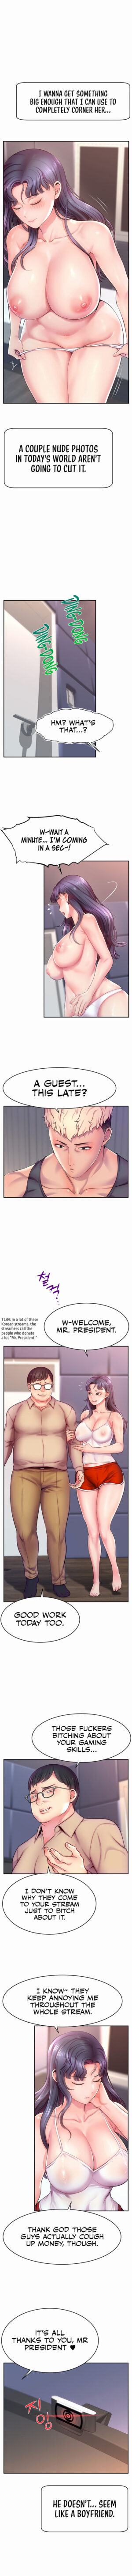 [Ohhhhhk, Boss Racoon] Making Friends With Streamers by Hacking! (1-14) [English] [Omega Scans] [Ongoing]